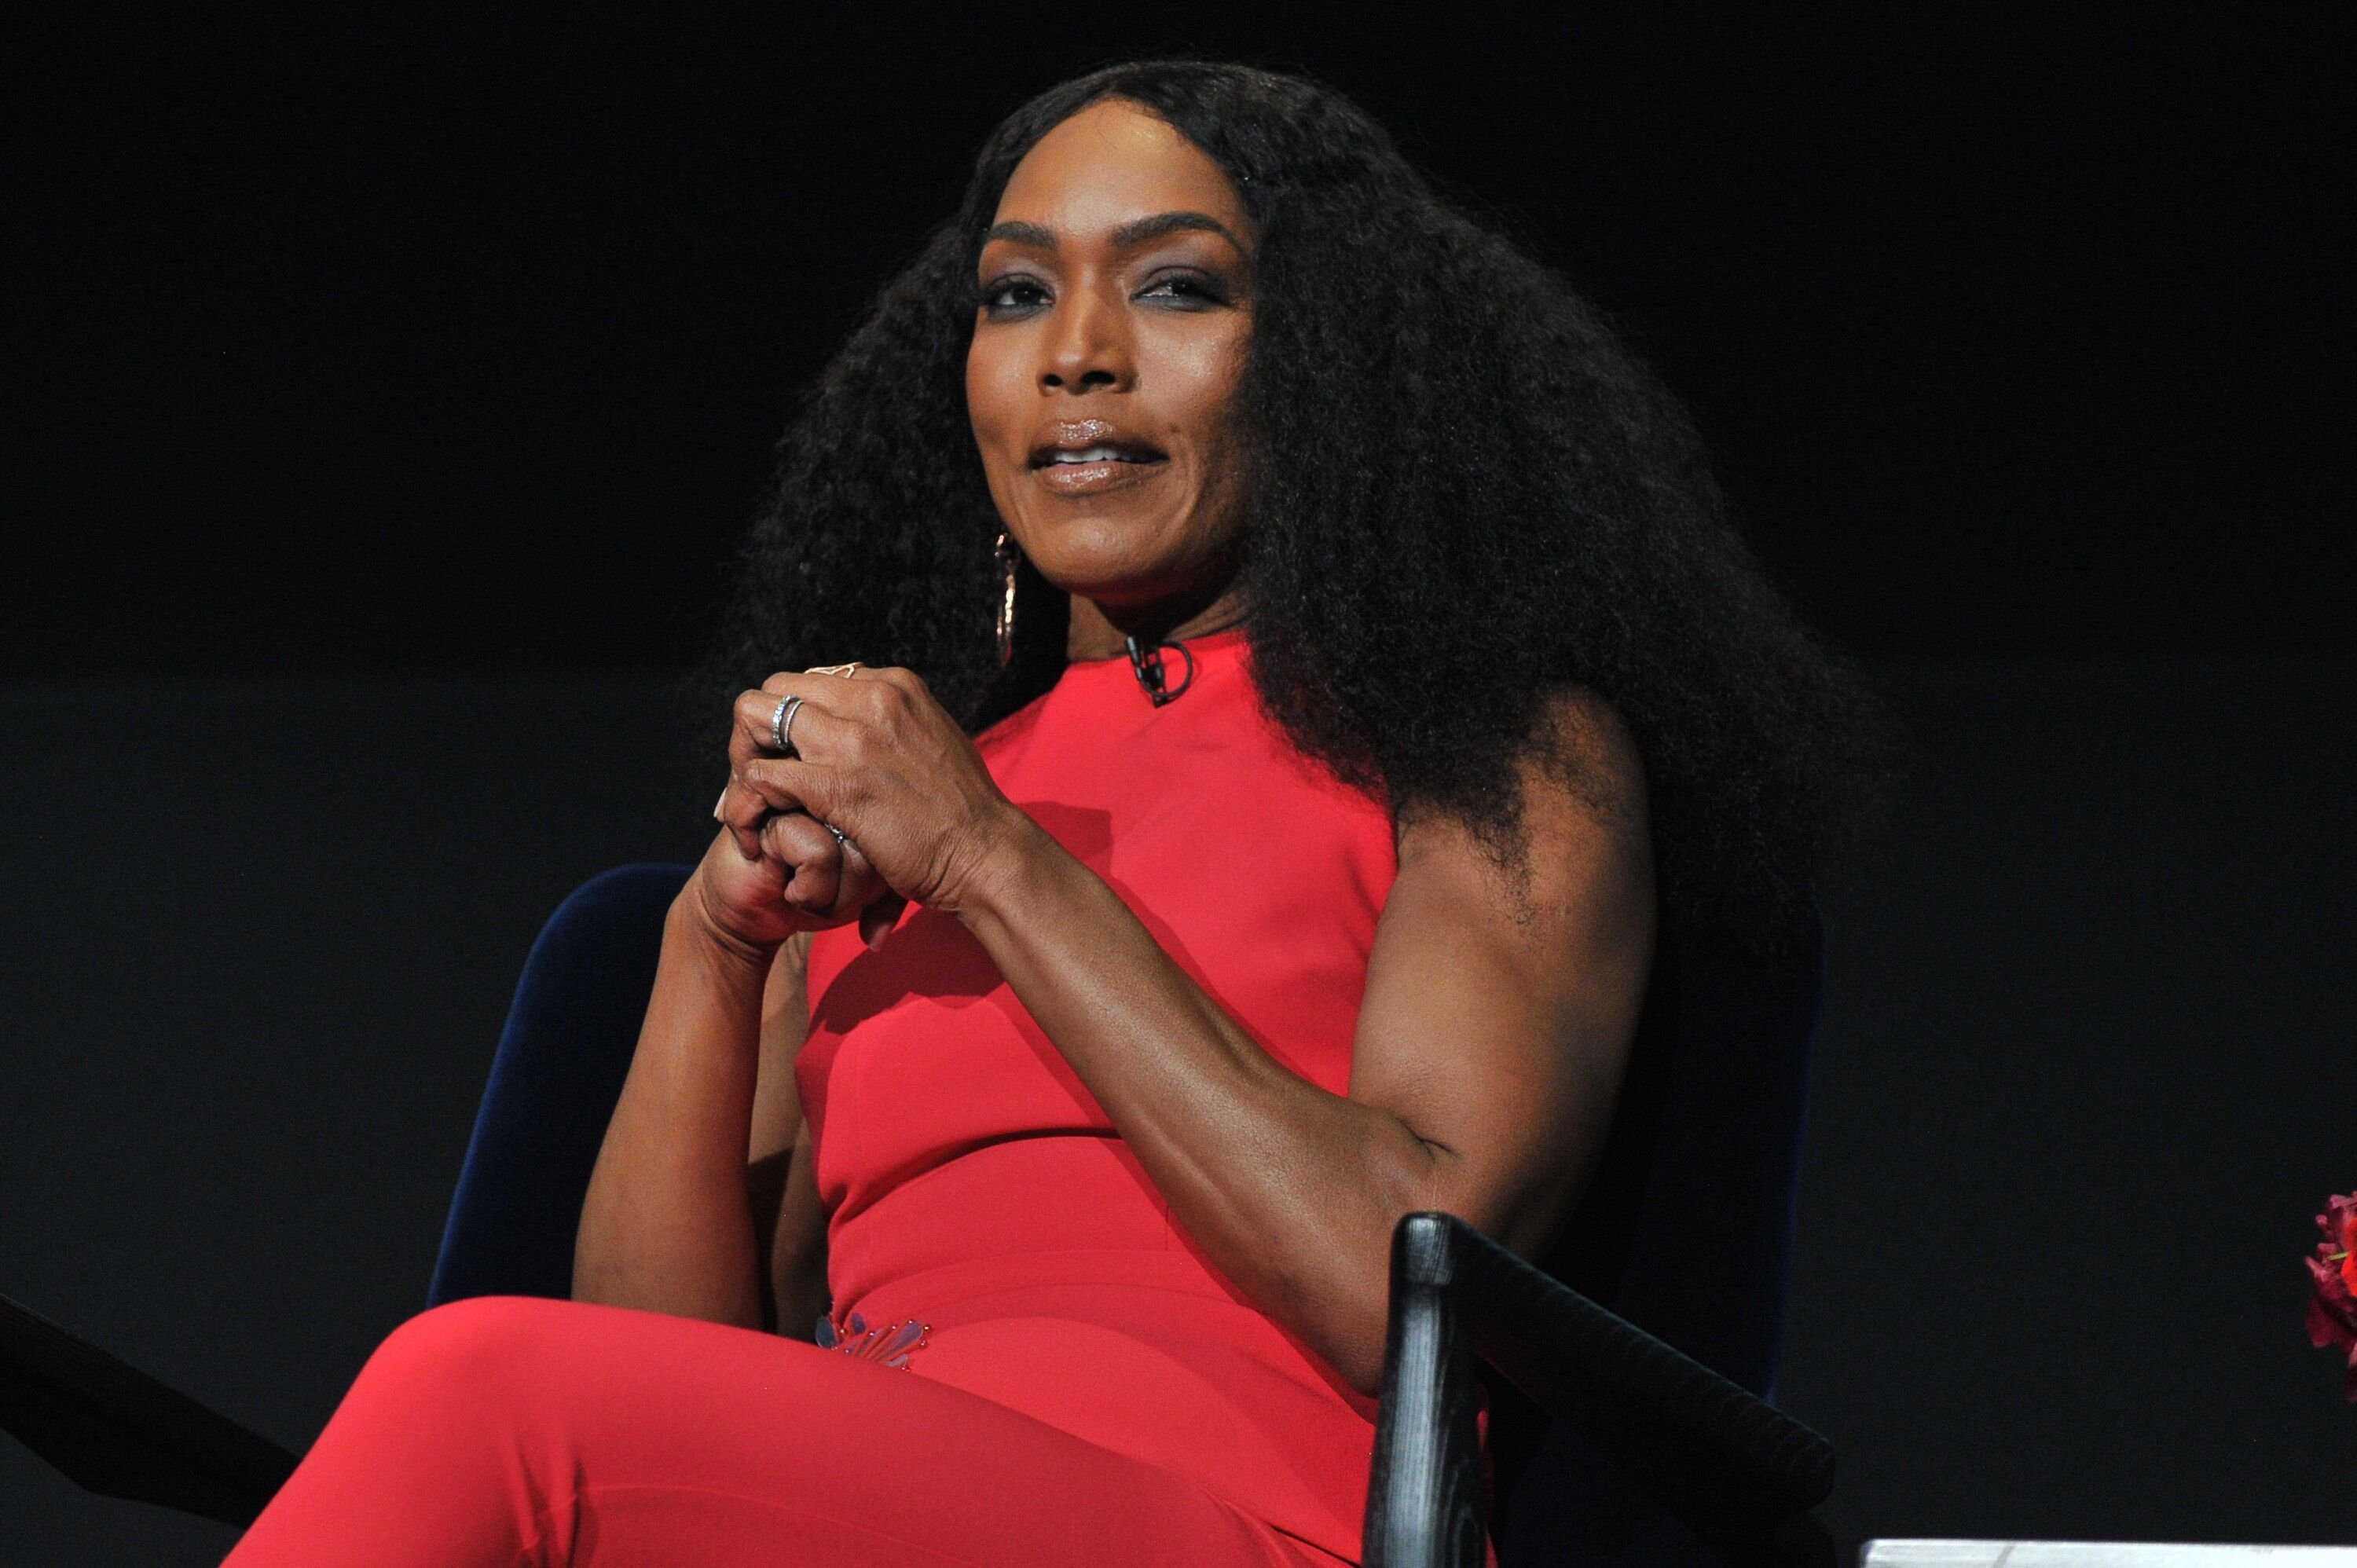 Actress and abuse survivor Angela Bassett/ Source: Getty Images